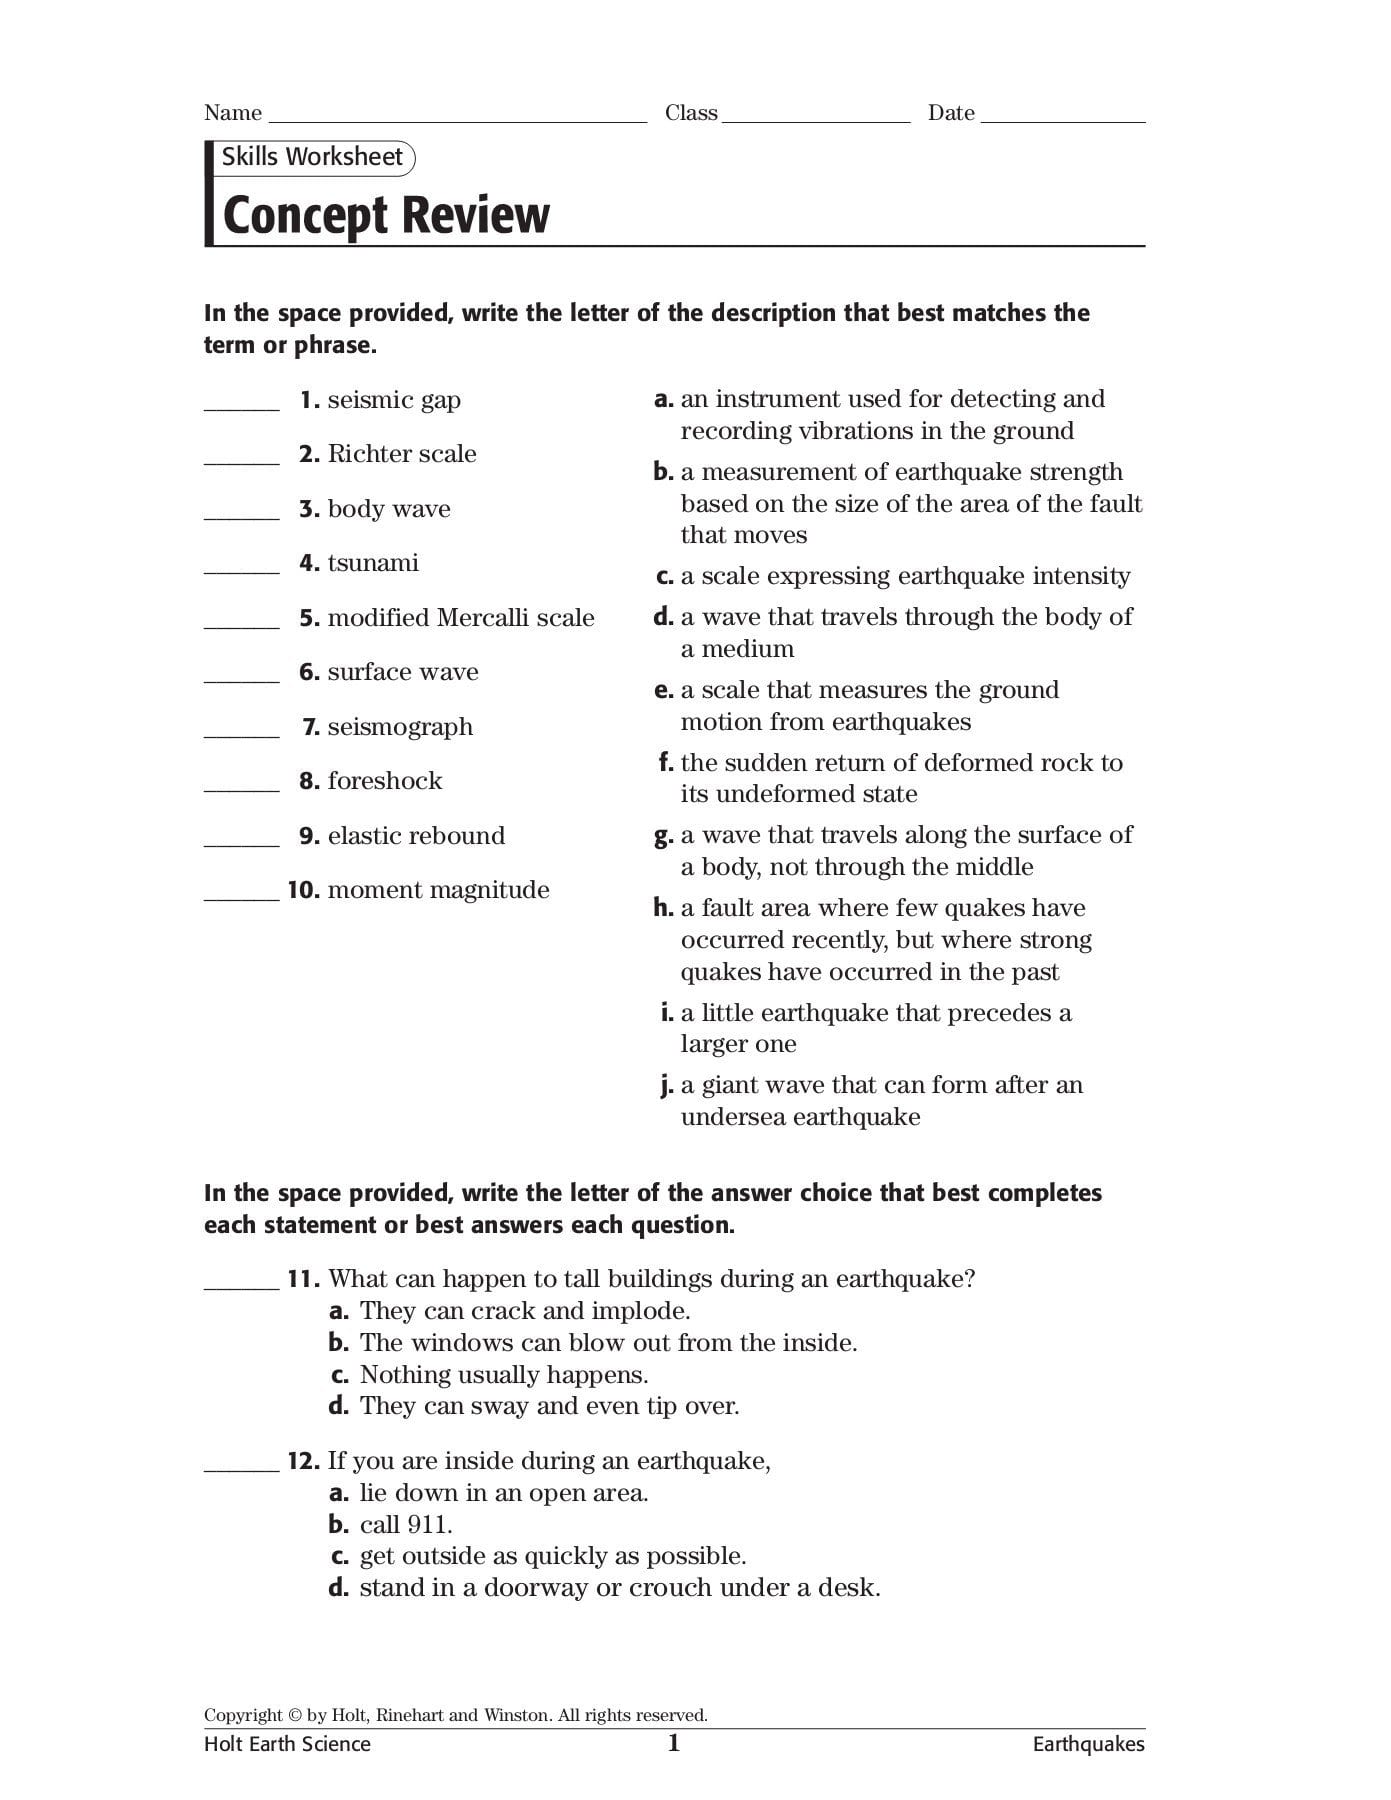 Skills Worksheet Concept Review Pages 1  3  Text Version  Fliphtml5 With Regard To Science Skills Worksheet